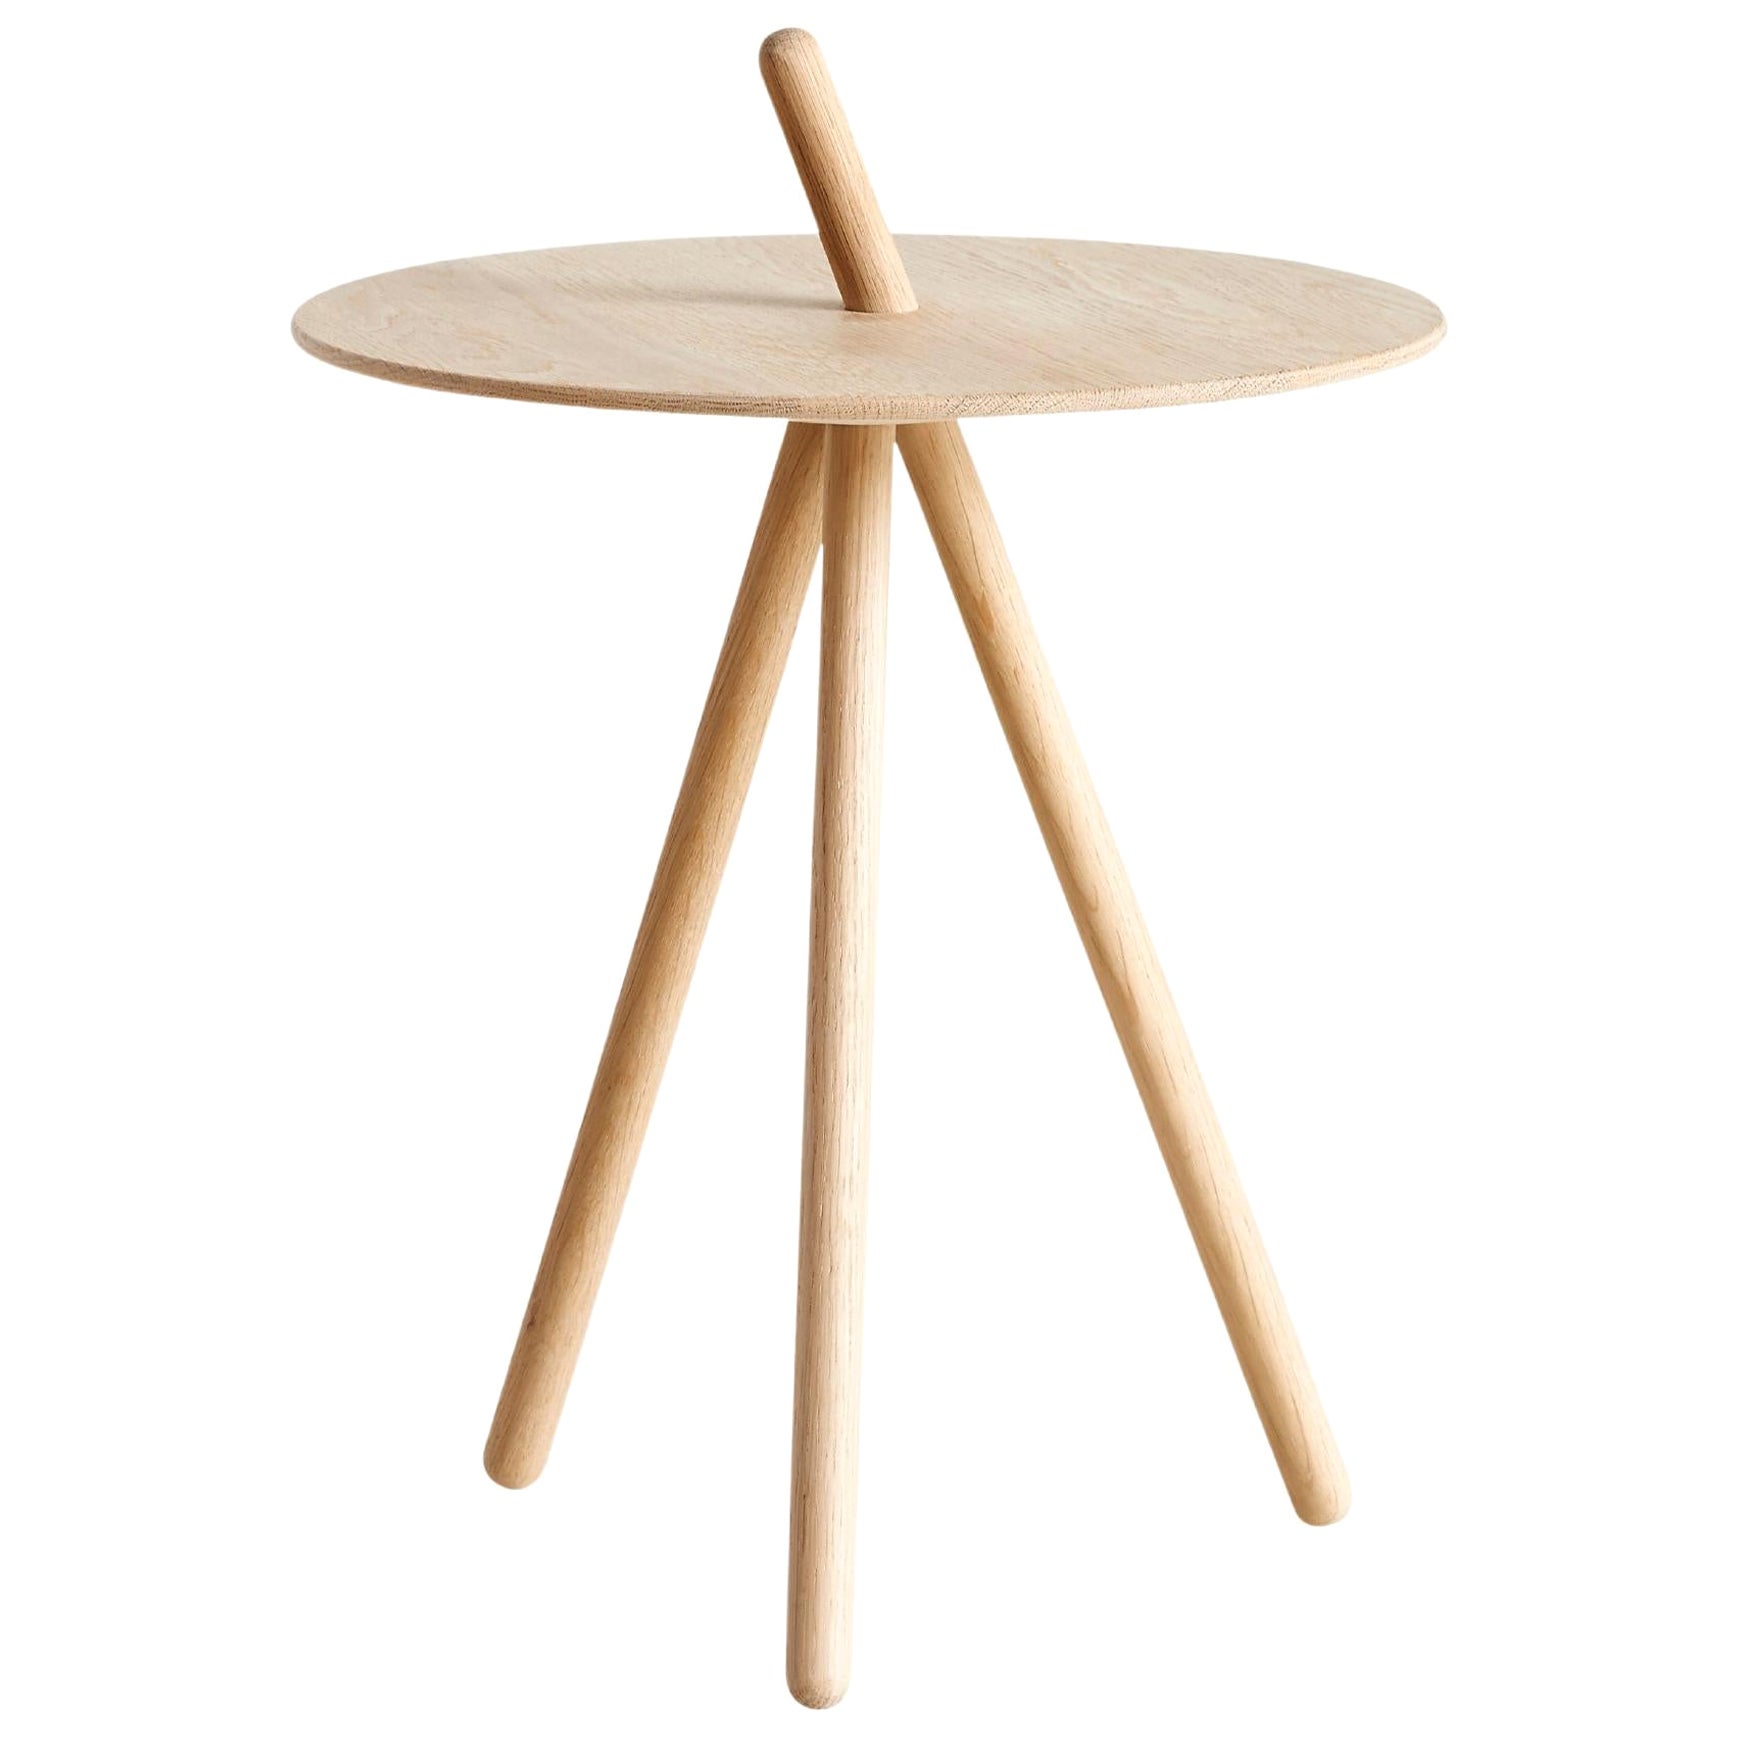 White Oak Come Here Side Table by Steffen Juul